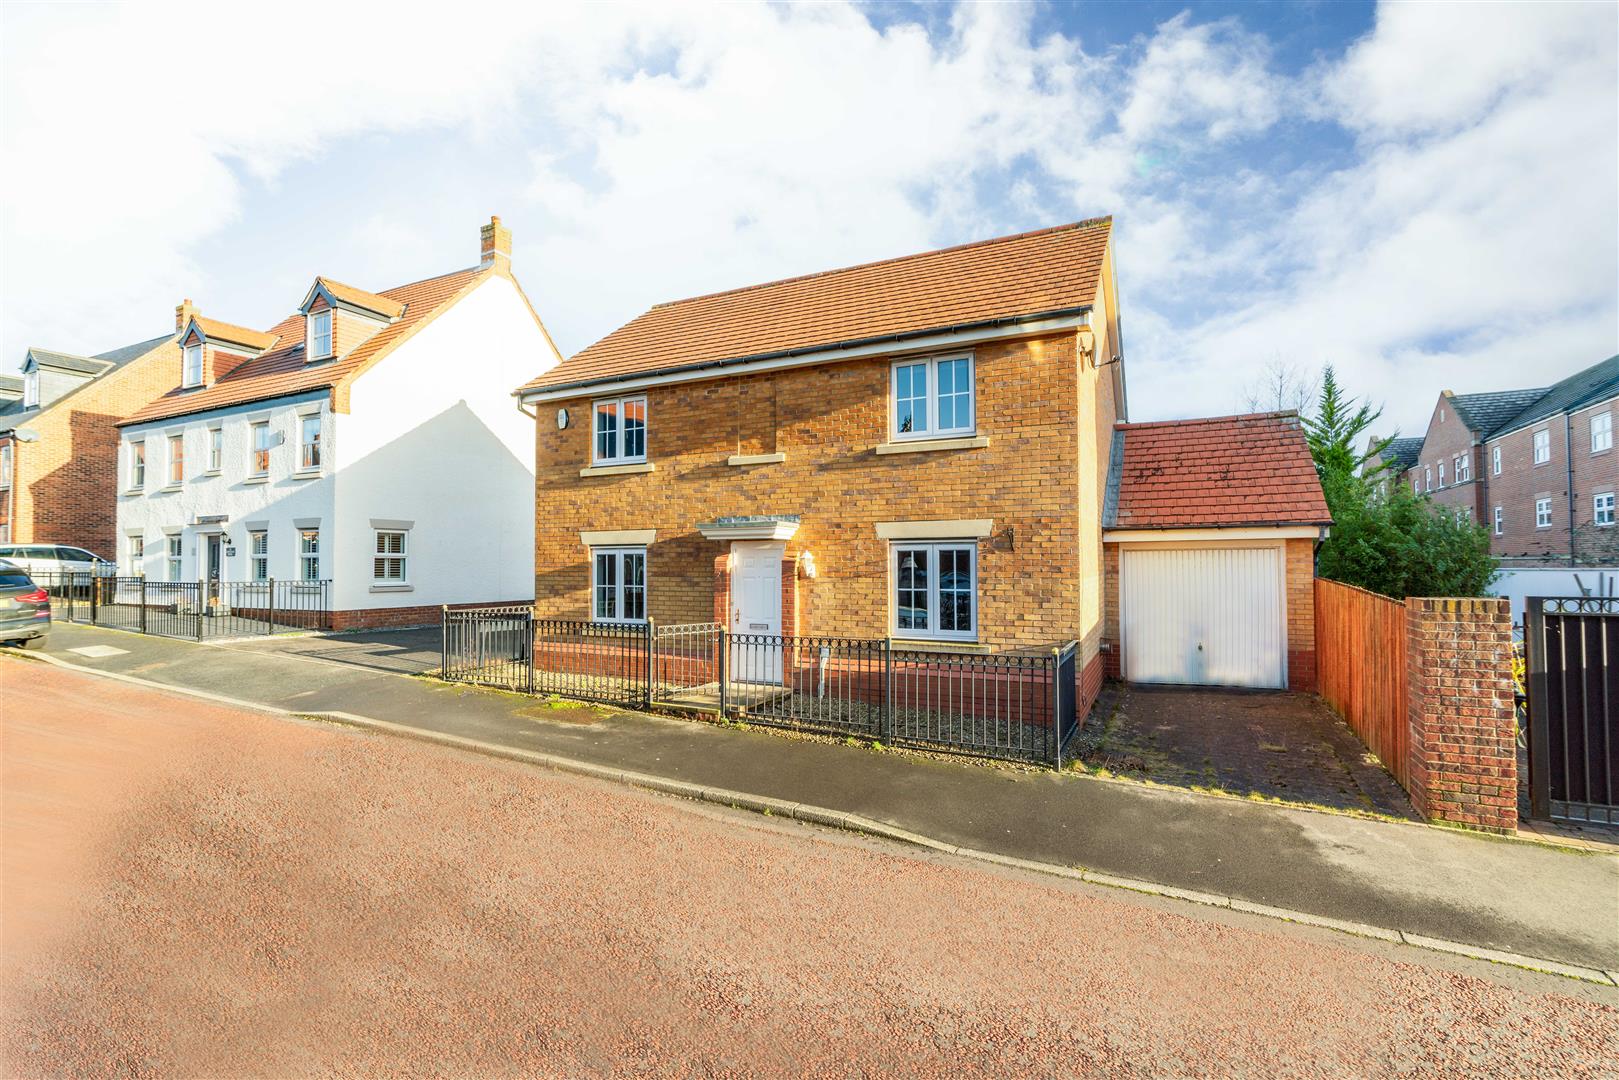 4 bed detached house for sale in Chipchase Mews, Great Park, NE3 